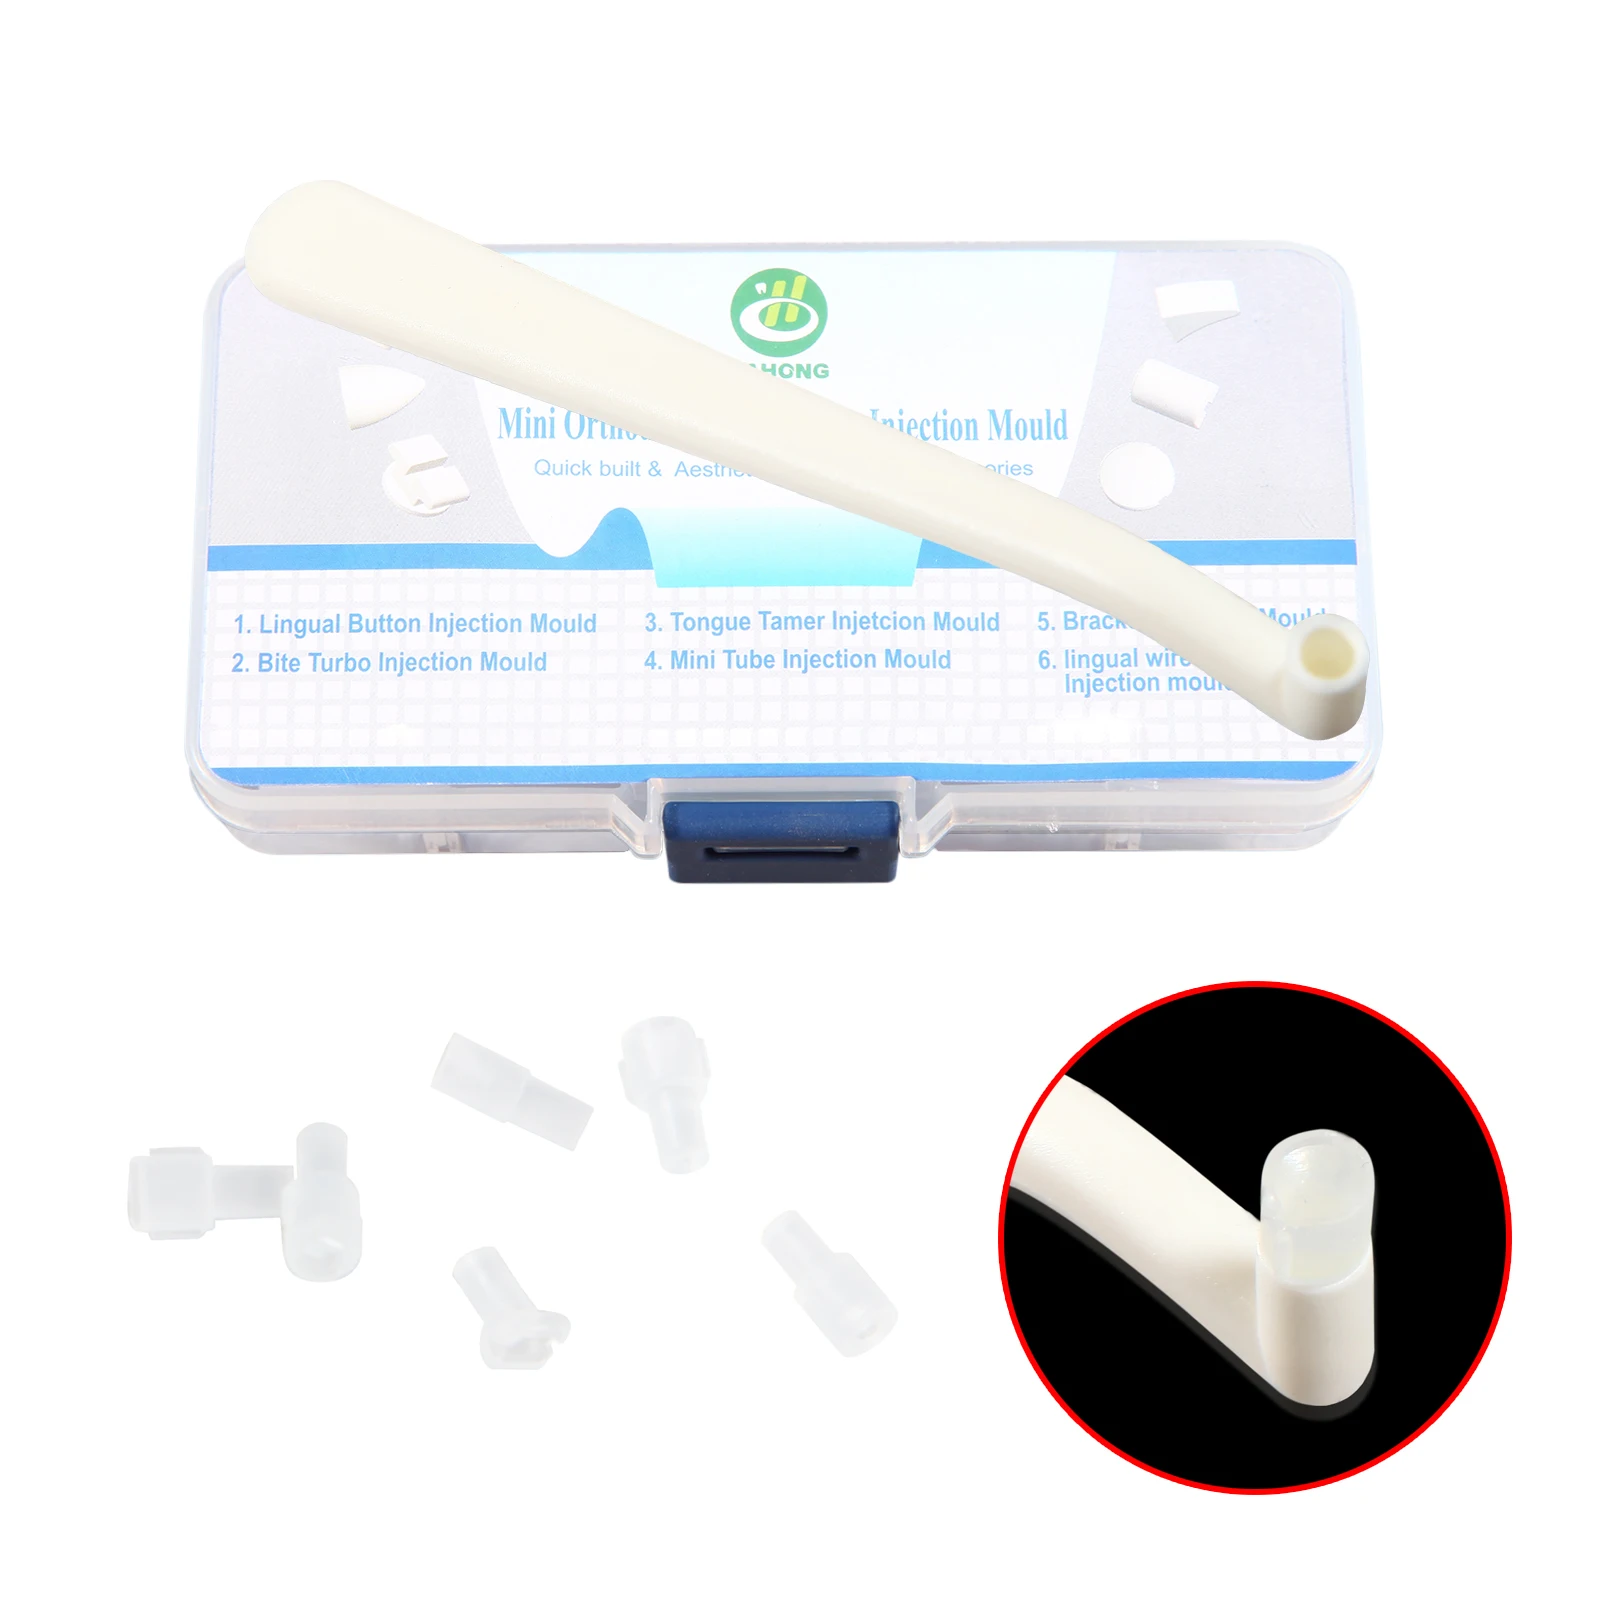 

1/2/3 Pcs Dental instrument Mini Orthodontic Bracket Lingual Button Wire Tongue Tamer Accessories Injection Mould High Quality